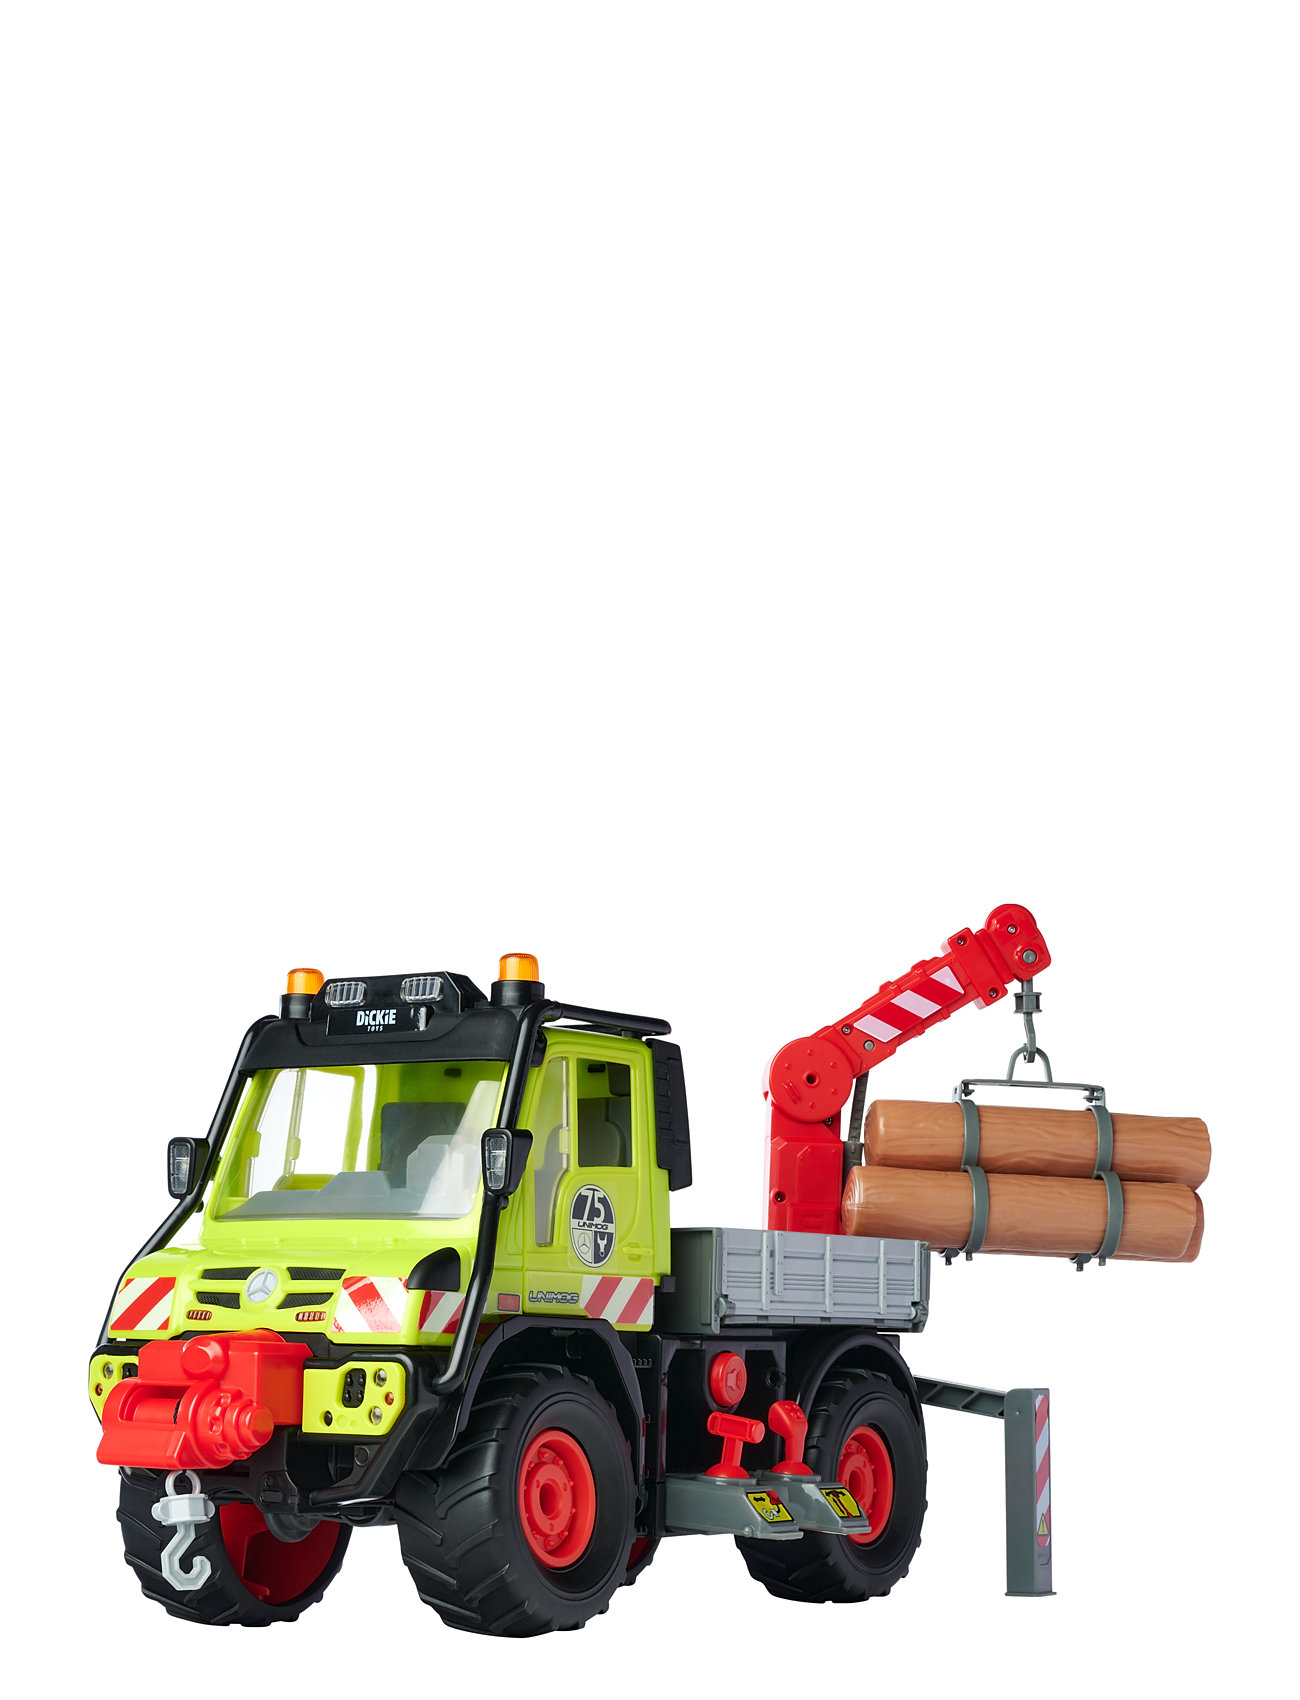 Unimog U530 Toys Toy Cars & Vehicles Toy Vehicles Construction Cars Multi/patterned Dickie Toys